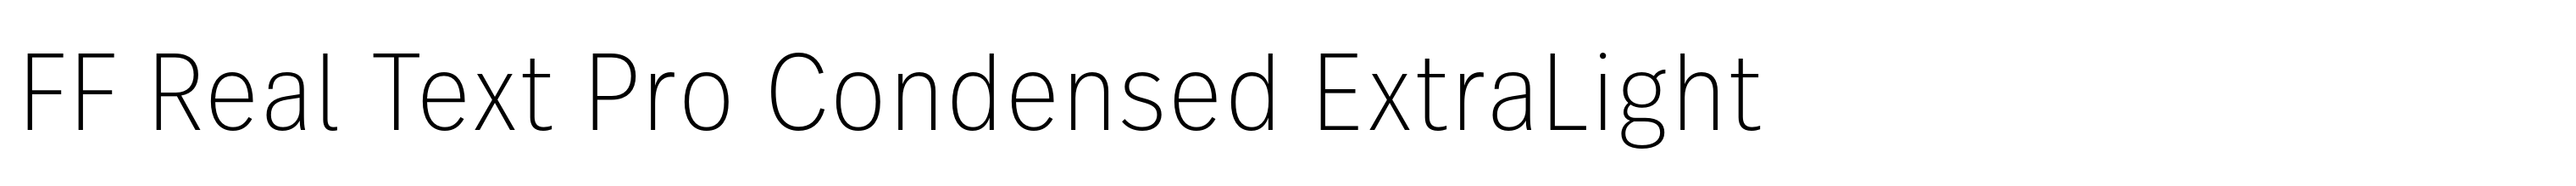 FF Real Text Pro Condensed ExtraLight